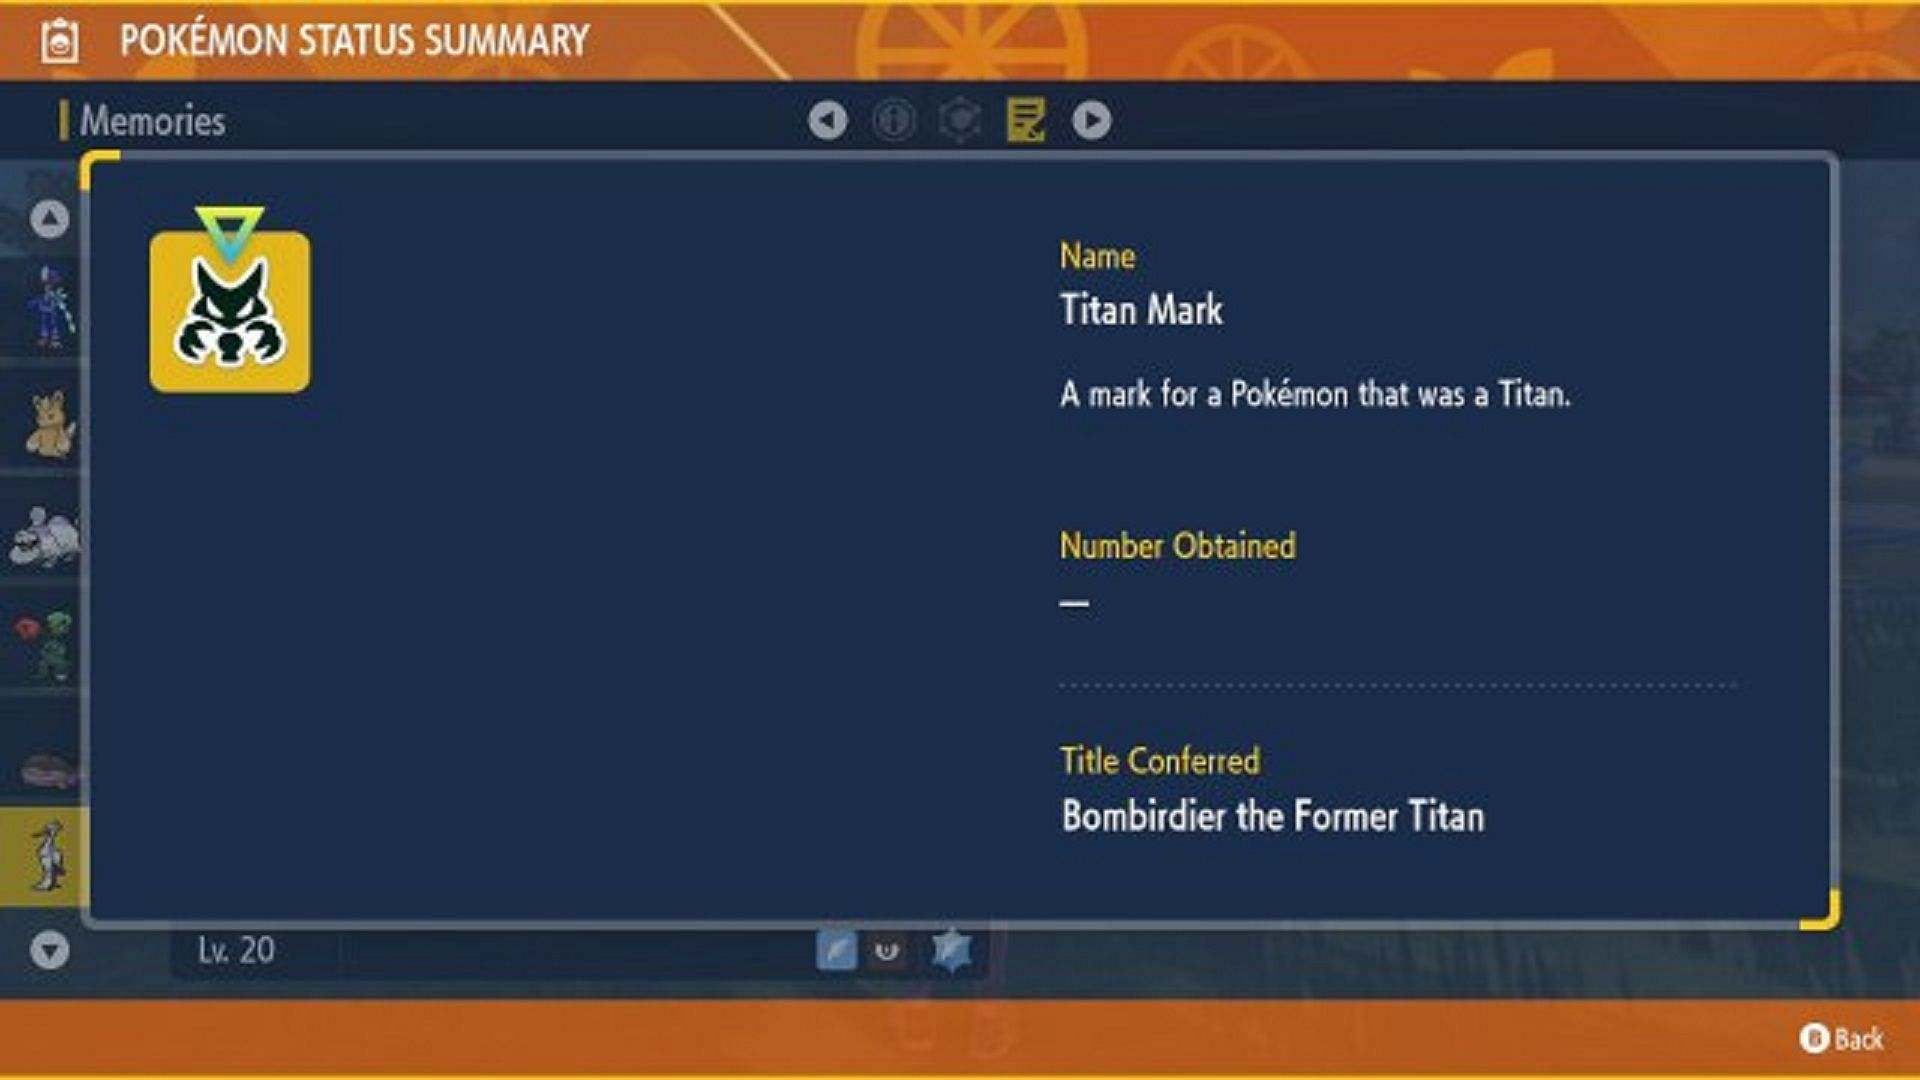 Titles are an intriguing Pokemon customization option seen in Scarlet and Violet (Image via Game Freak)